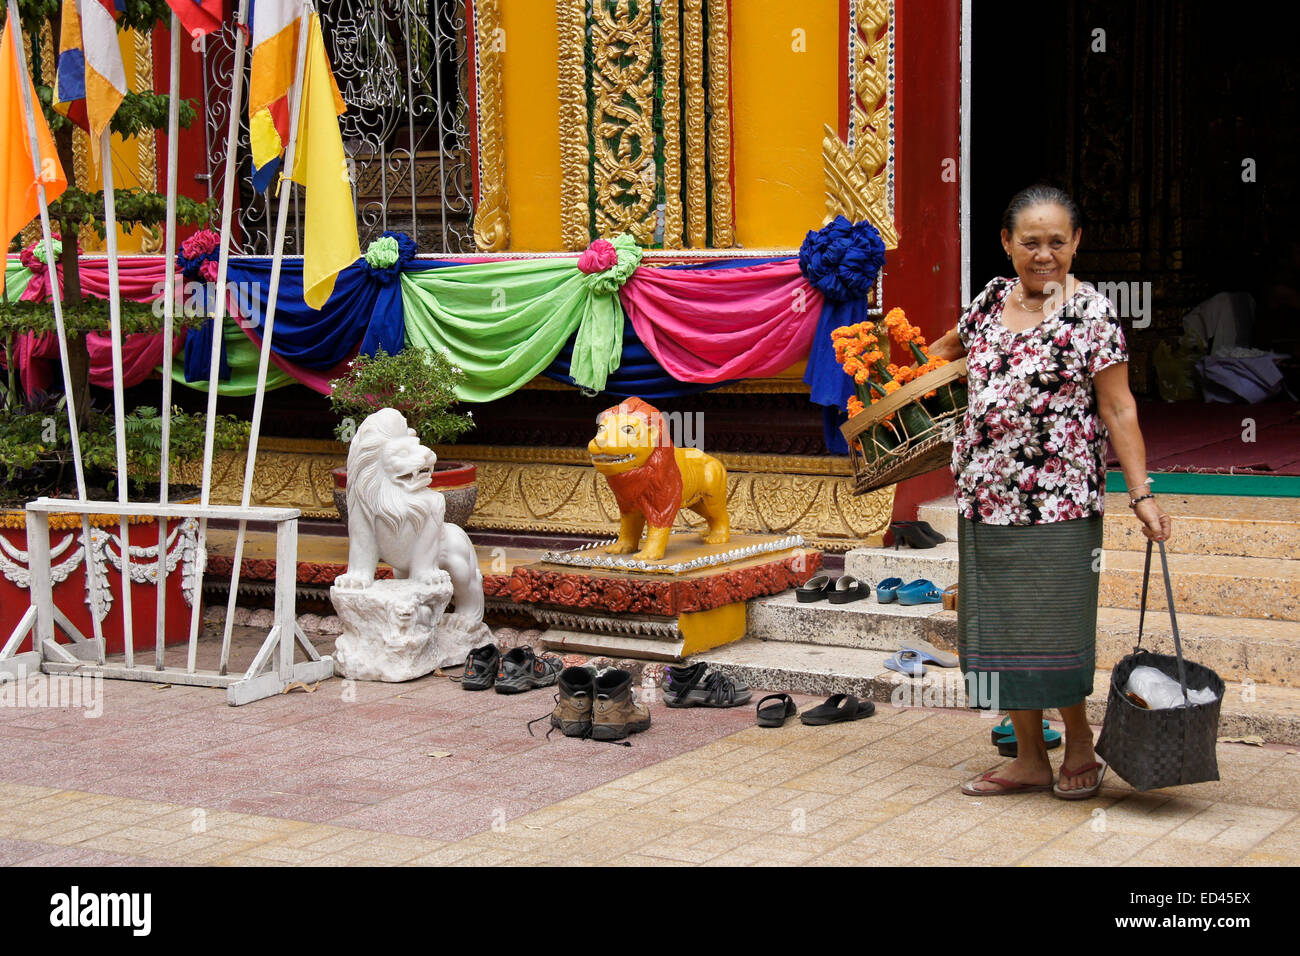 Woman selling flowers at Wat Si Muang Buddhist temple, Vientiane, Laos Stock Photo